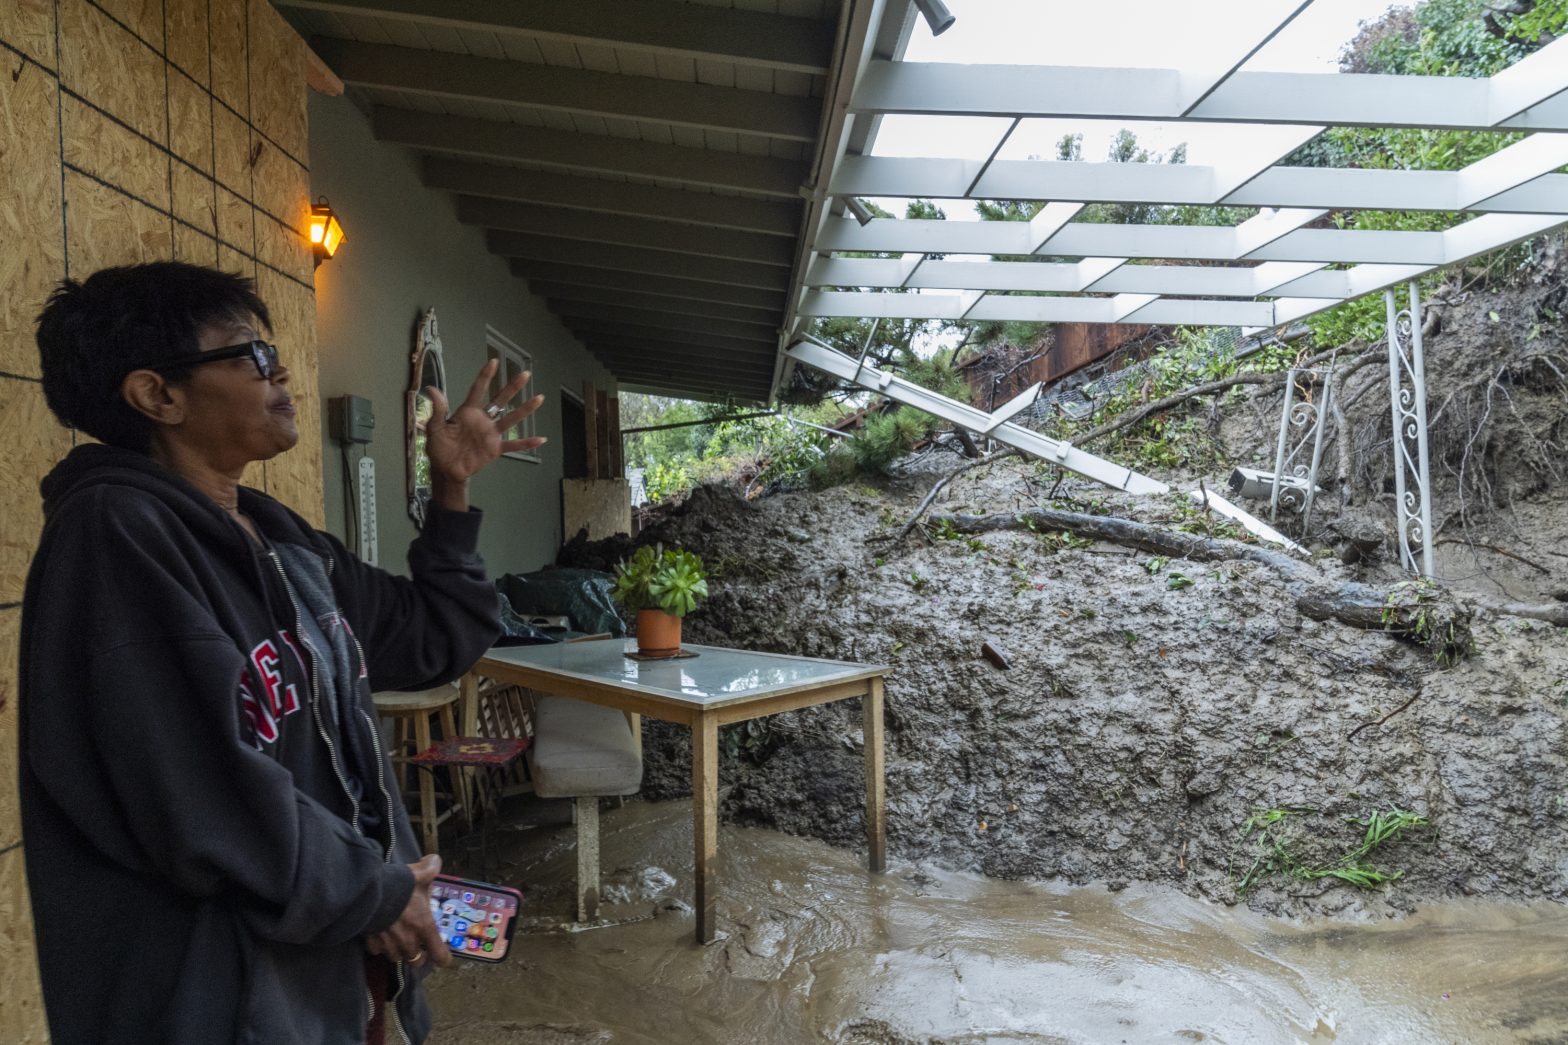 Los Angeles Records Over 300 Mudslides During Storm That Has Drenched Southern California